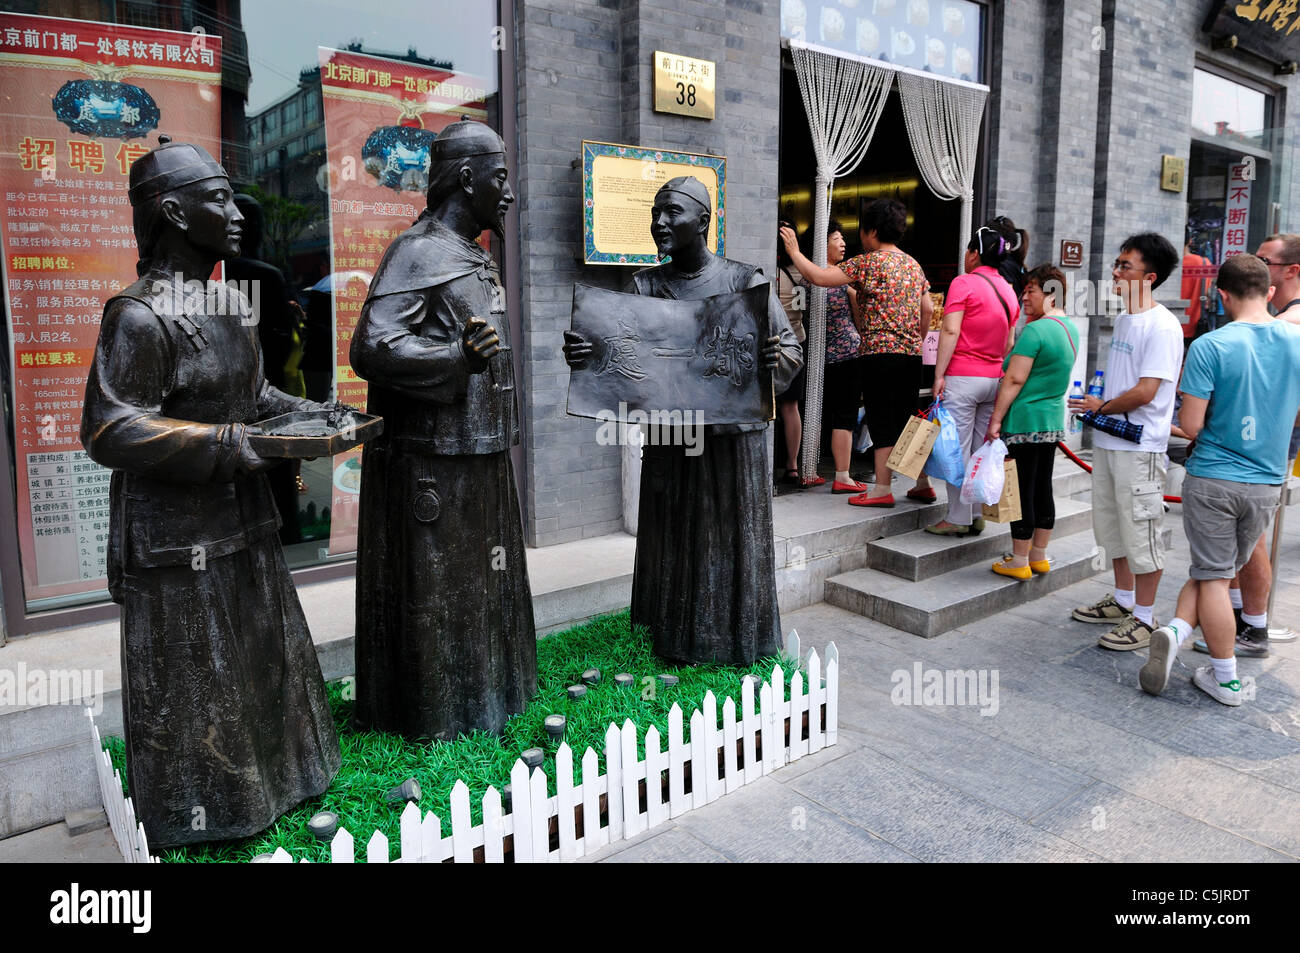 People waiting on line to get in a well-know restaurant. Beijing, China. Stock Photo